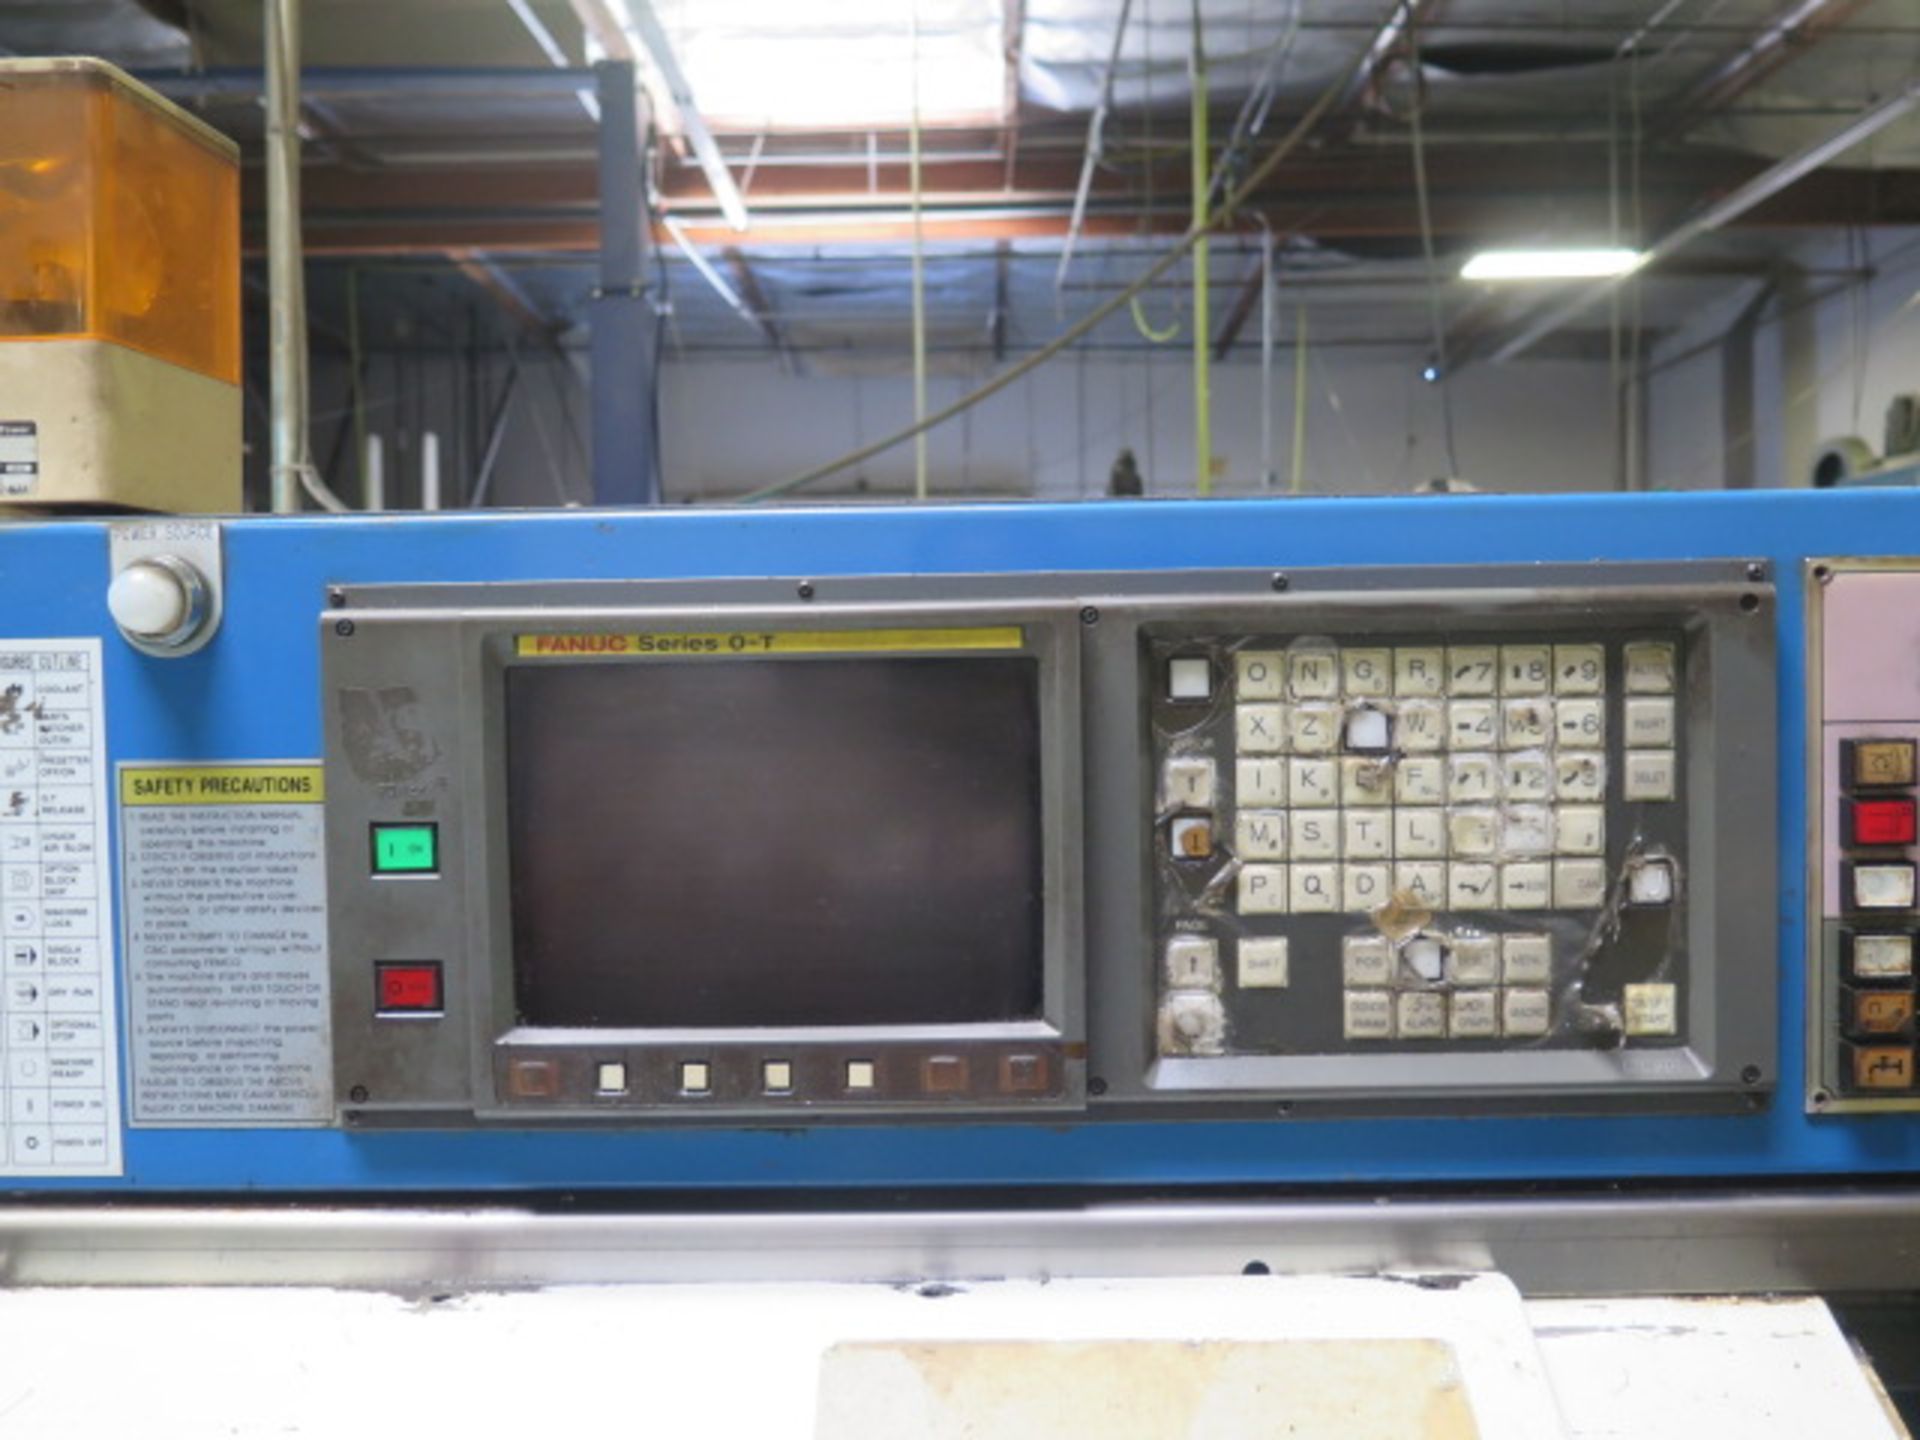 Femco Durga-25E CNC Turning Center s/n L5E387 w/ Fanuc 0-T Controls, 12-Station Turret, SOLD AS IS - Image 11 of 13